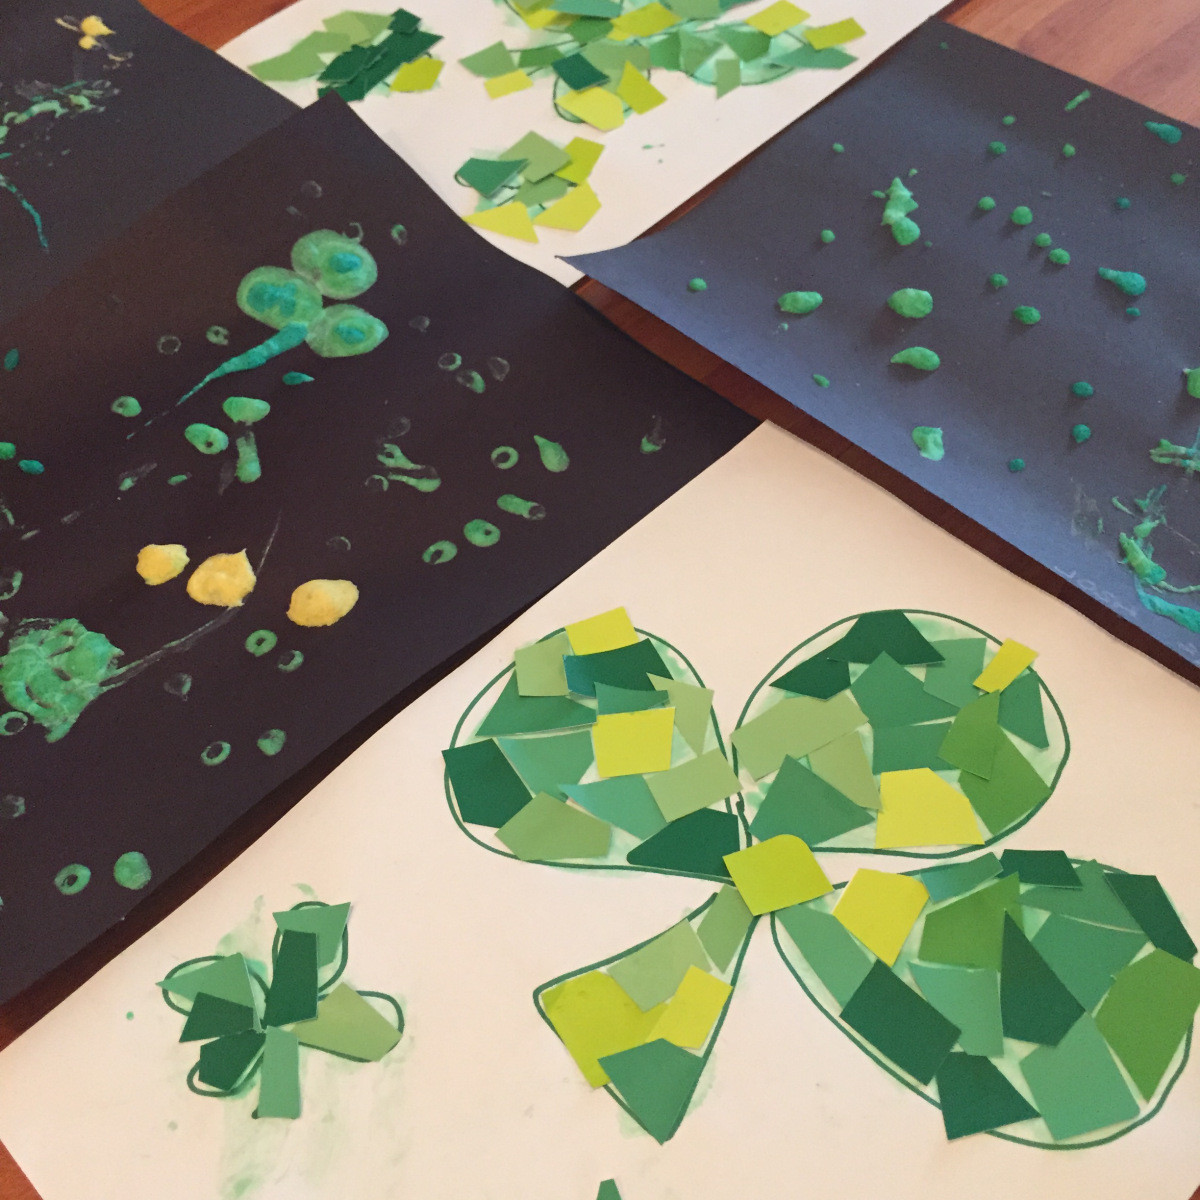 Saint Patrick Day Arts And Crafts
 St Patrick’s Day Arts and Craft